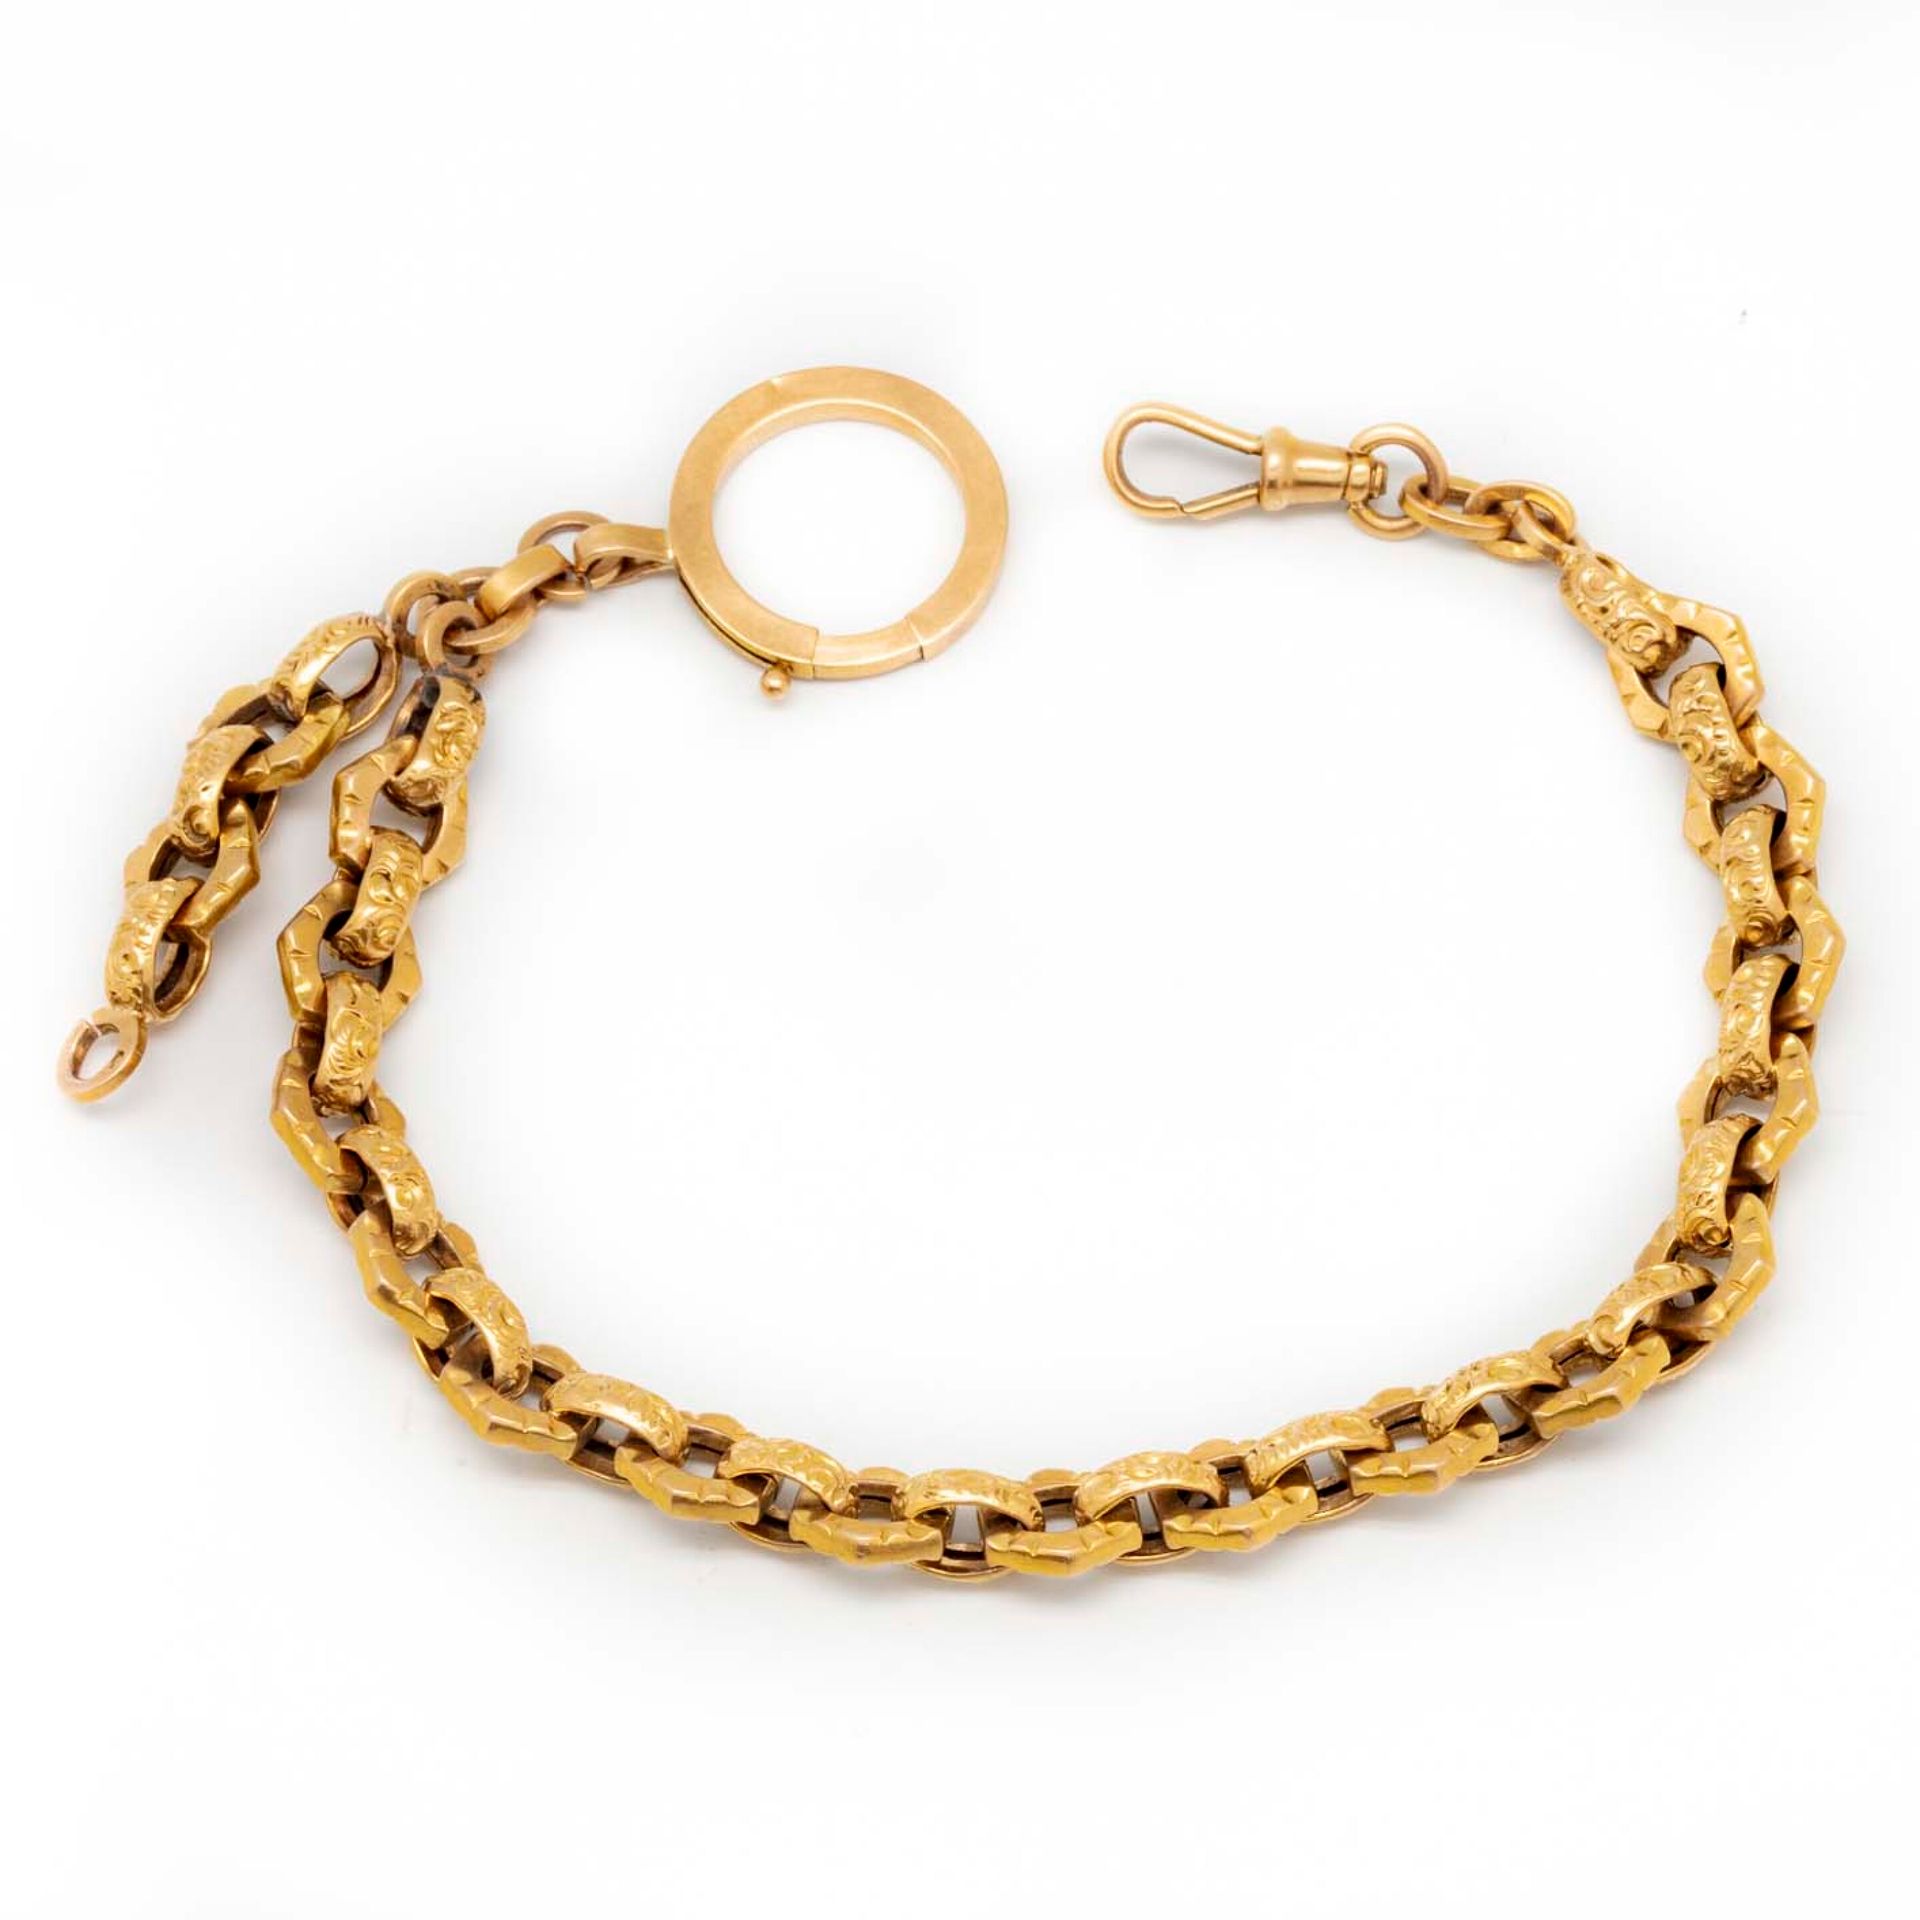 Null Yellow gold watch chain

Weight : 16 g.